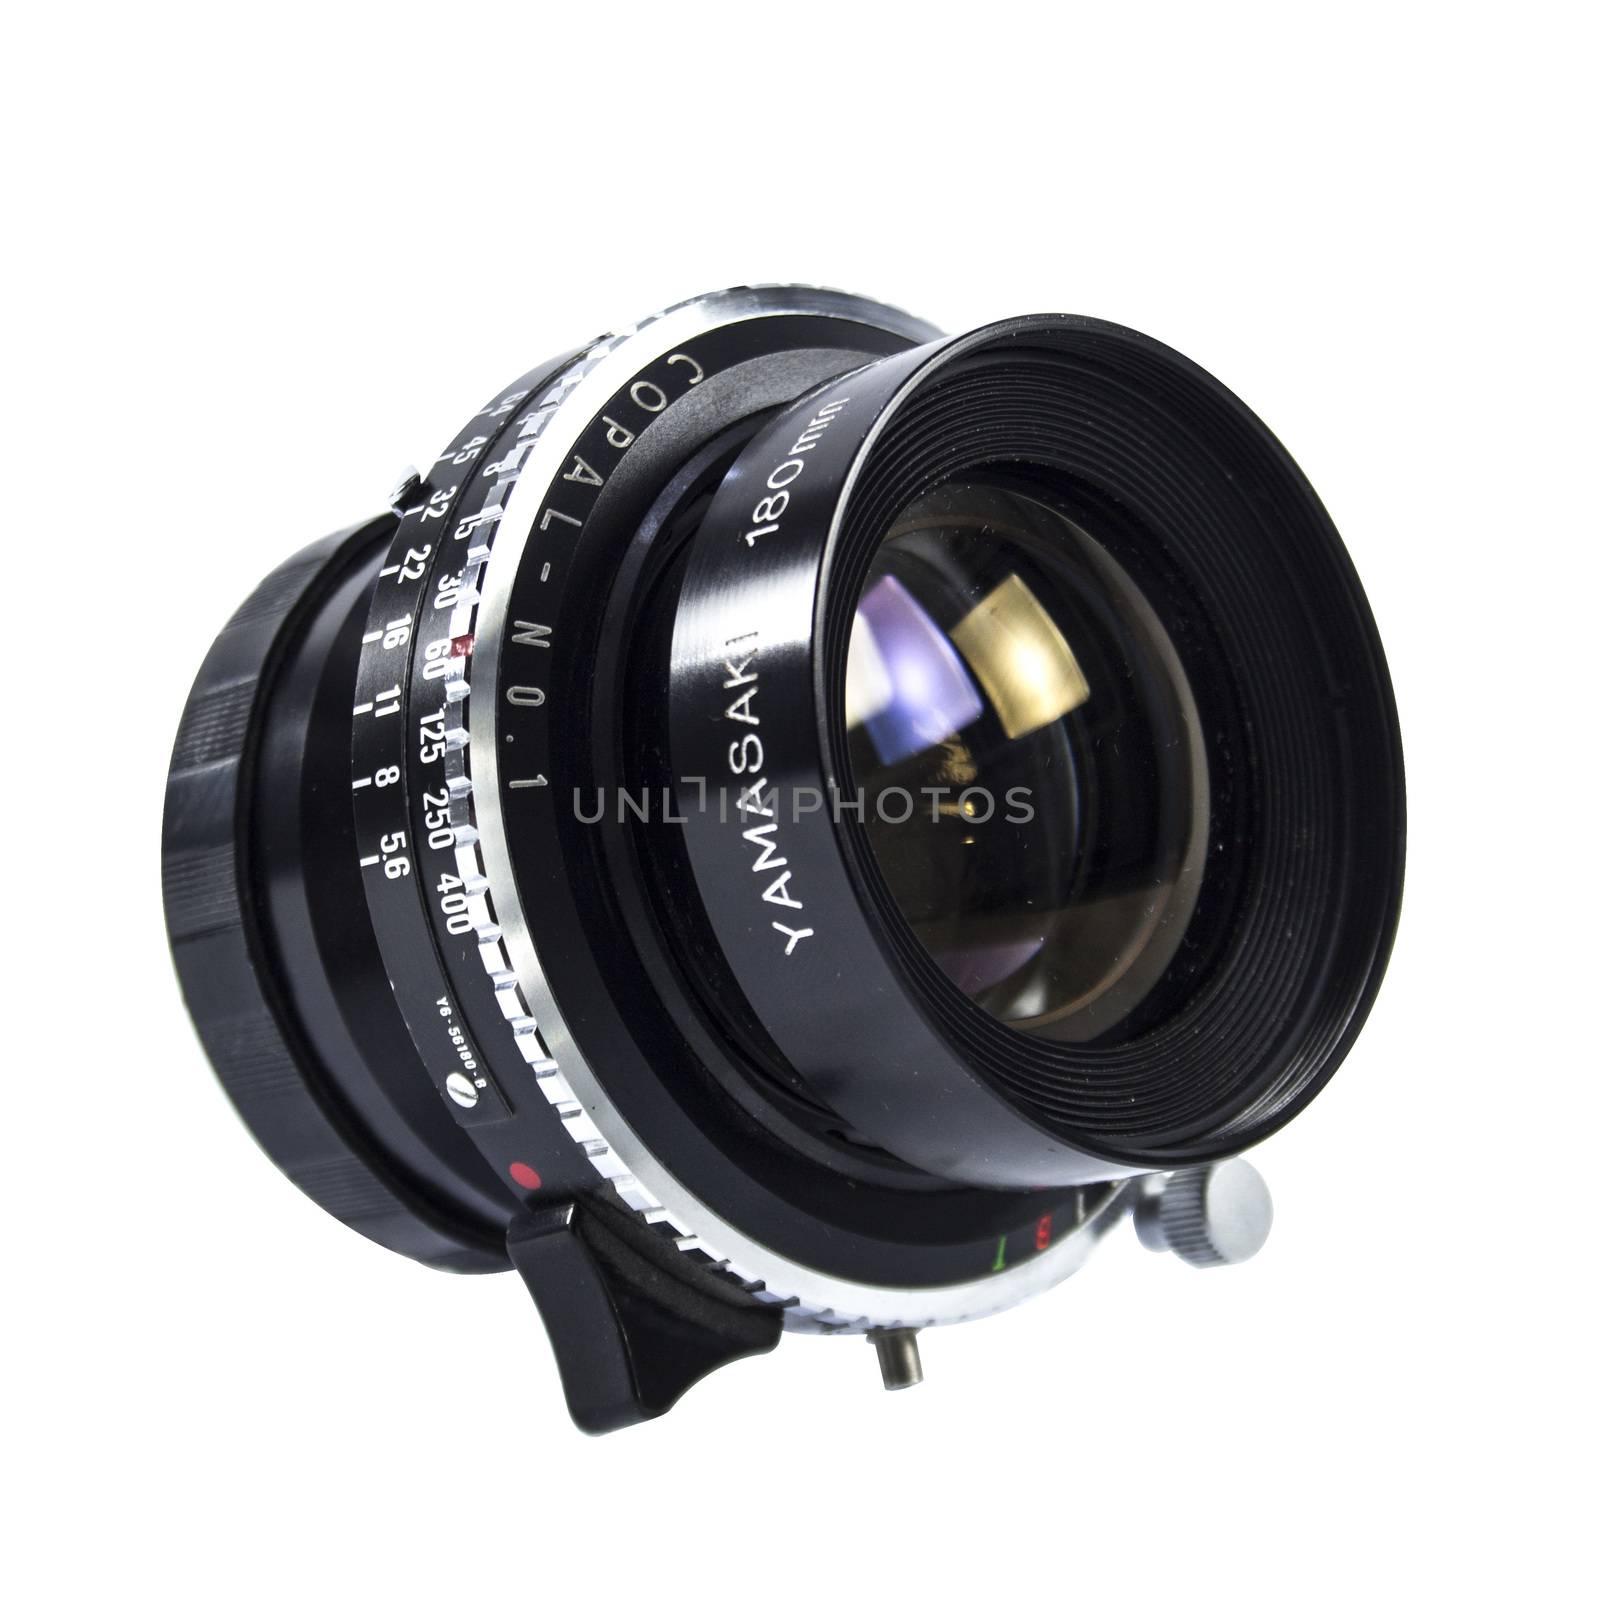 An old manual control camera lens by designsstock